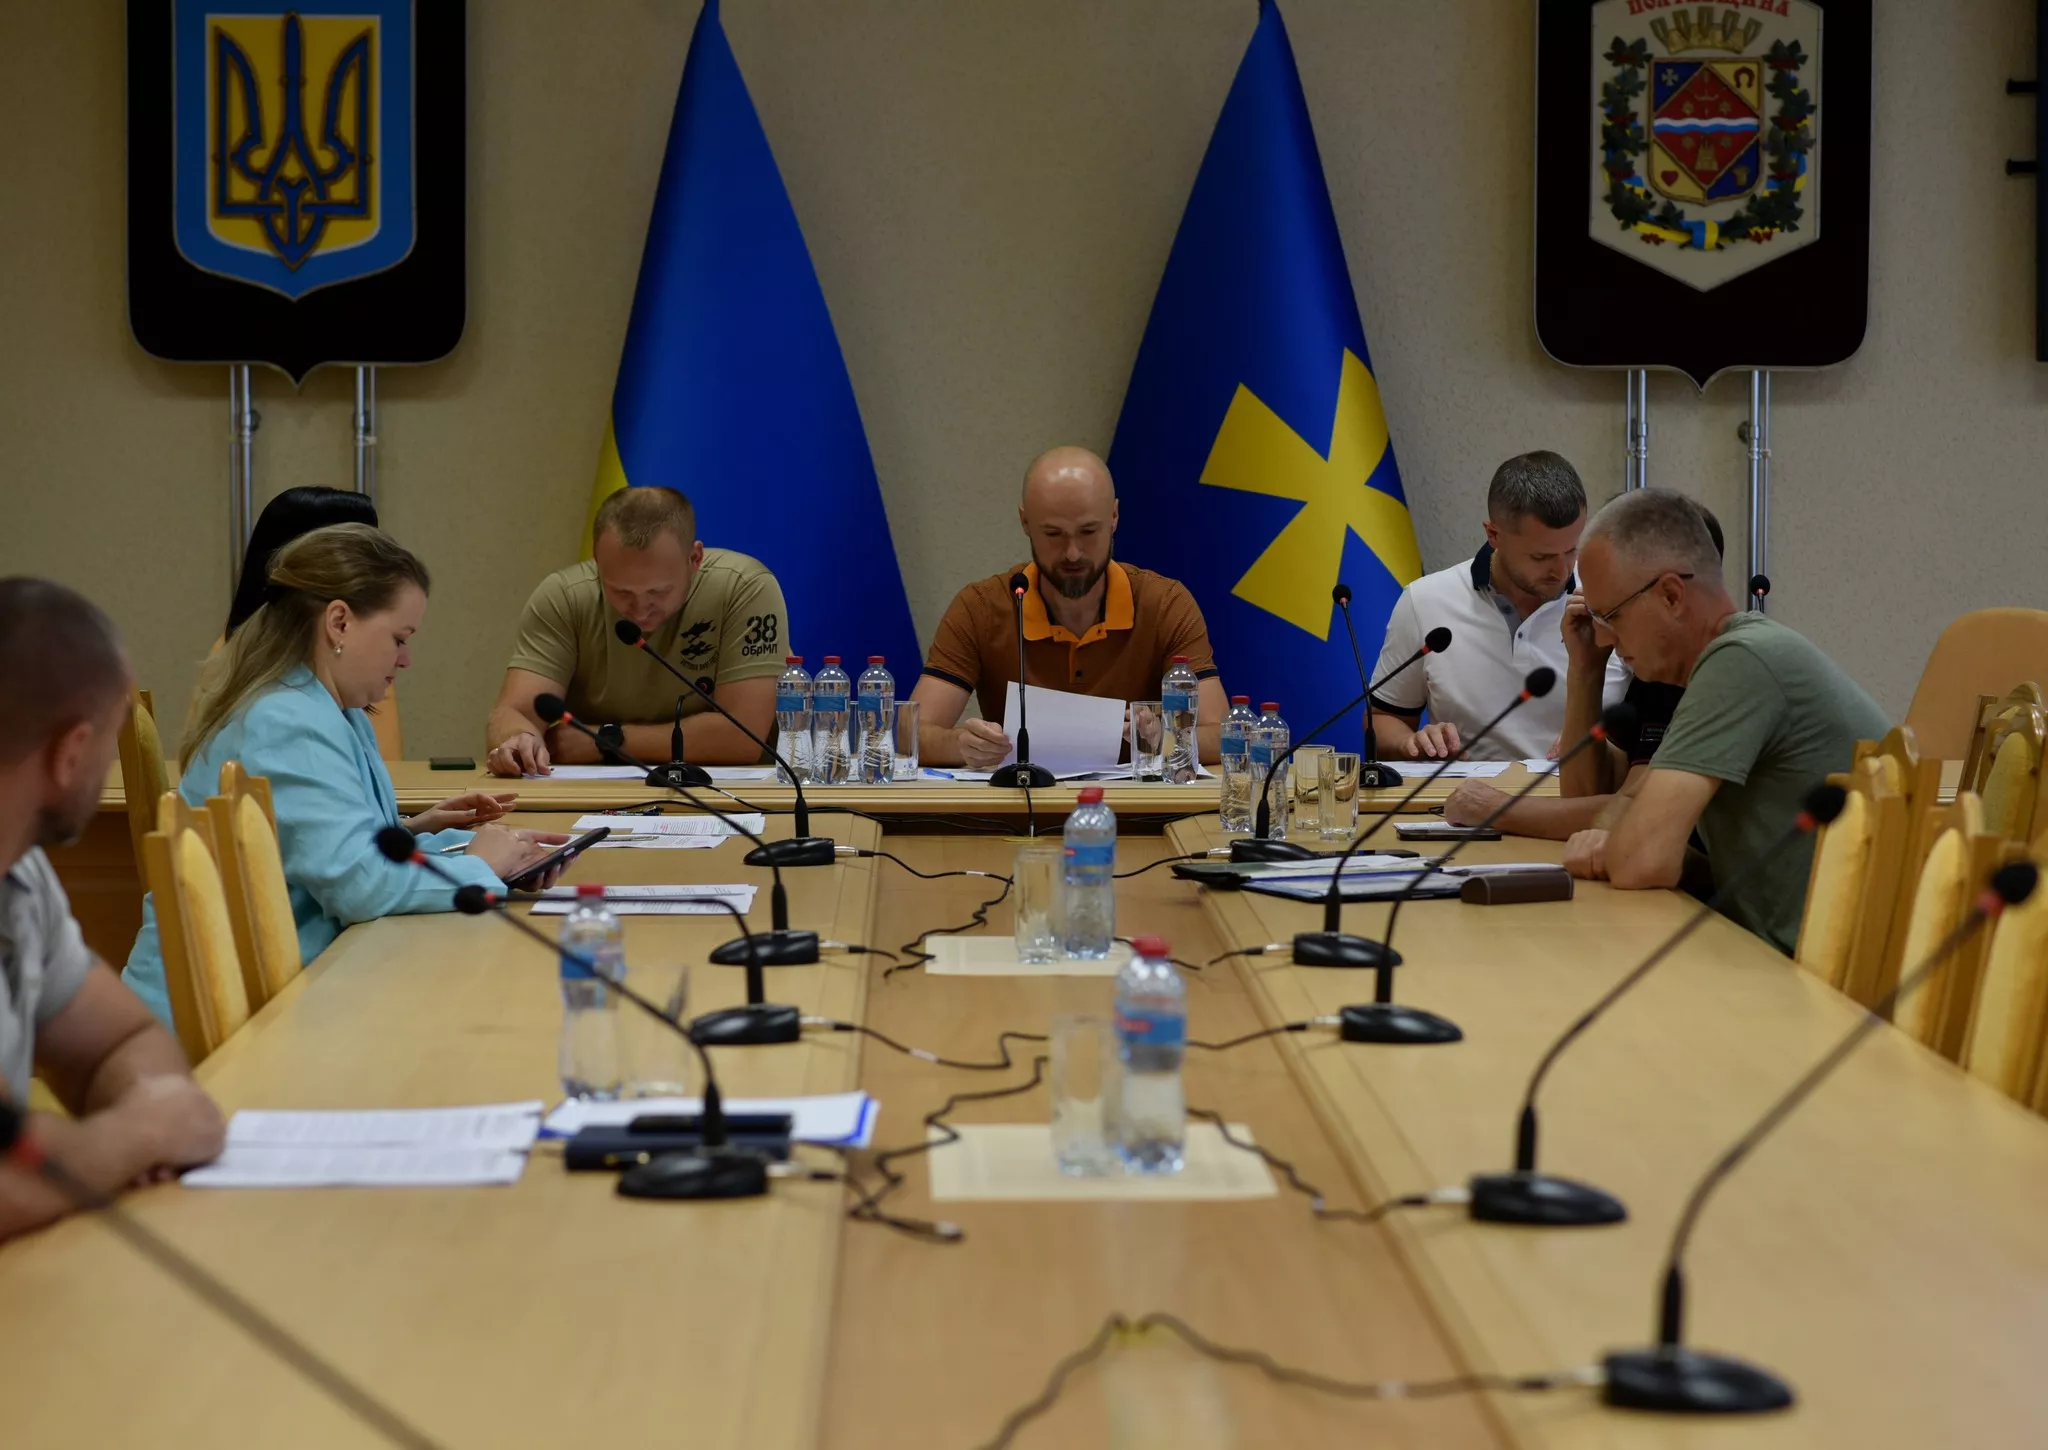 In the Poltava region almost 50 million hryvnias were allocated from the regional budget for drones, thermal imagers and other needs of the Armed Forces of Ukraine